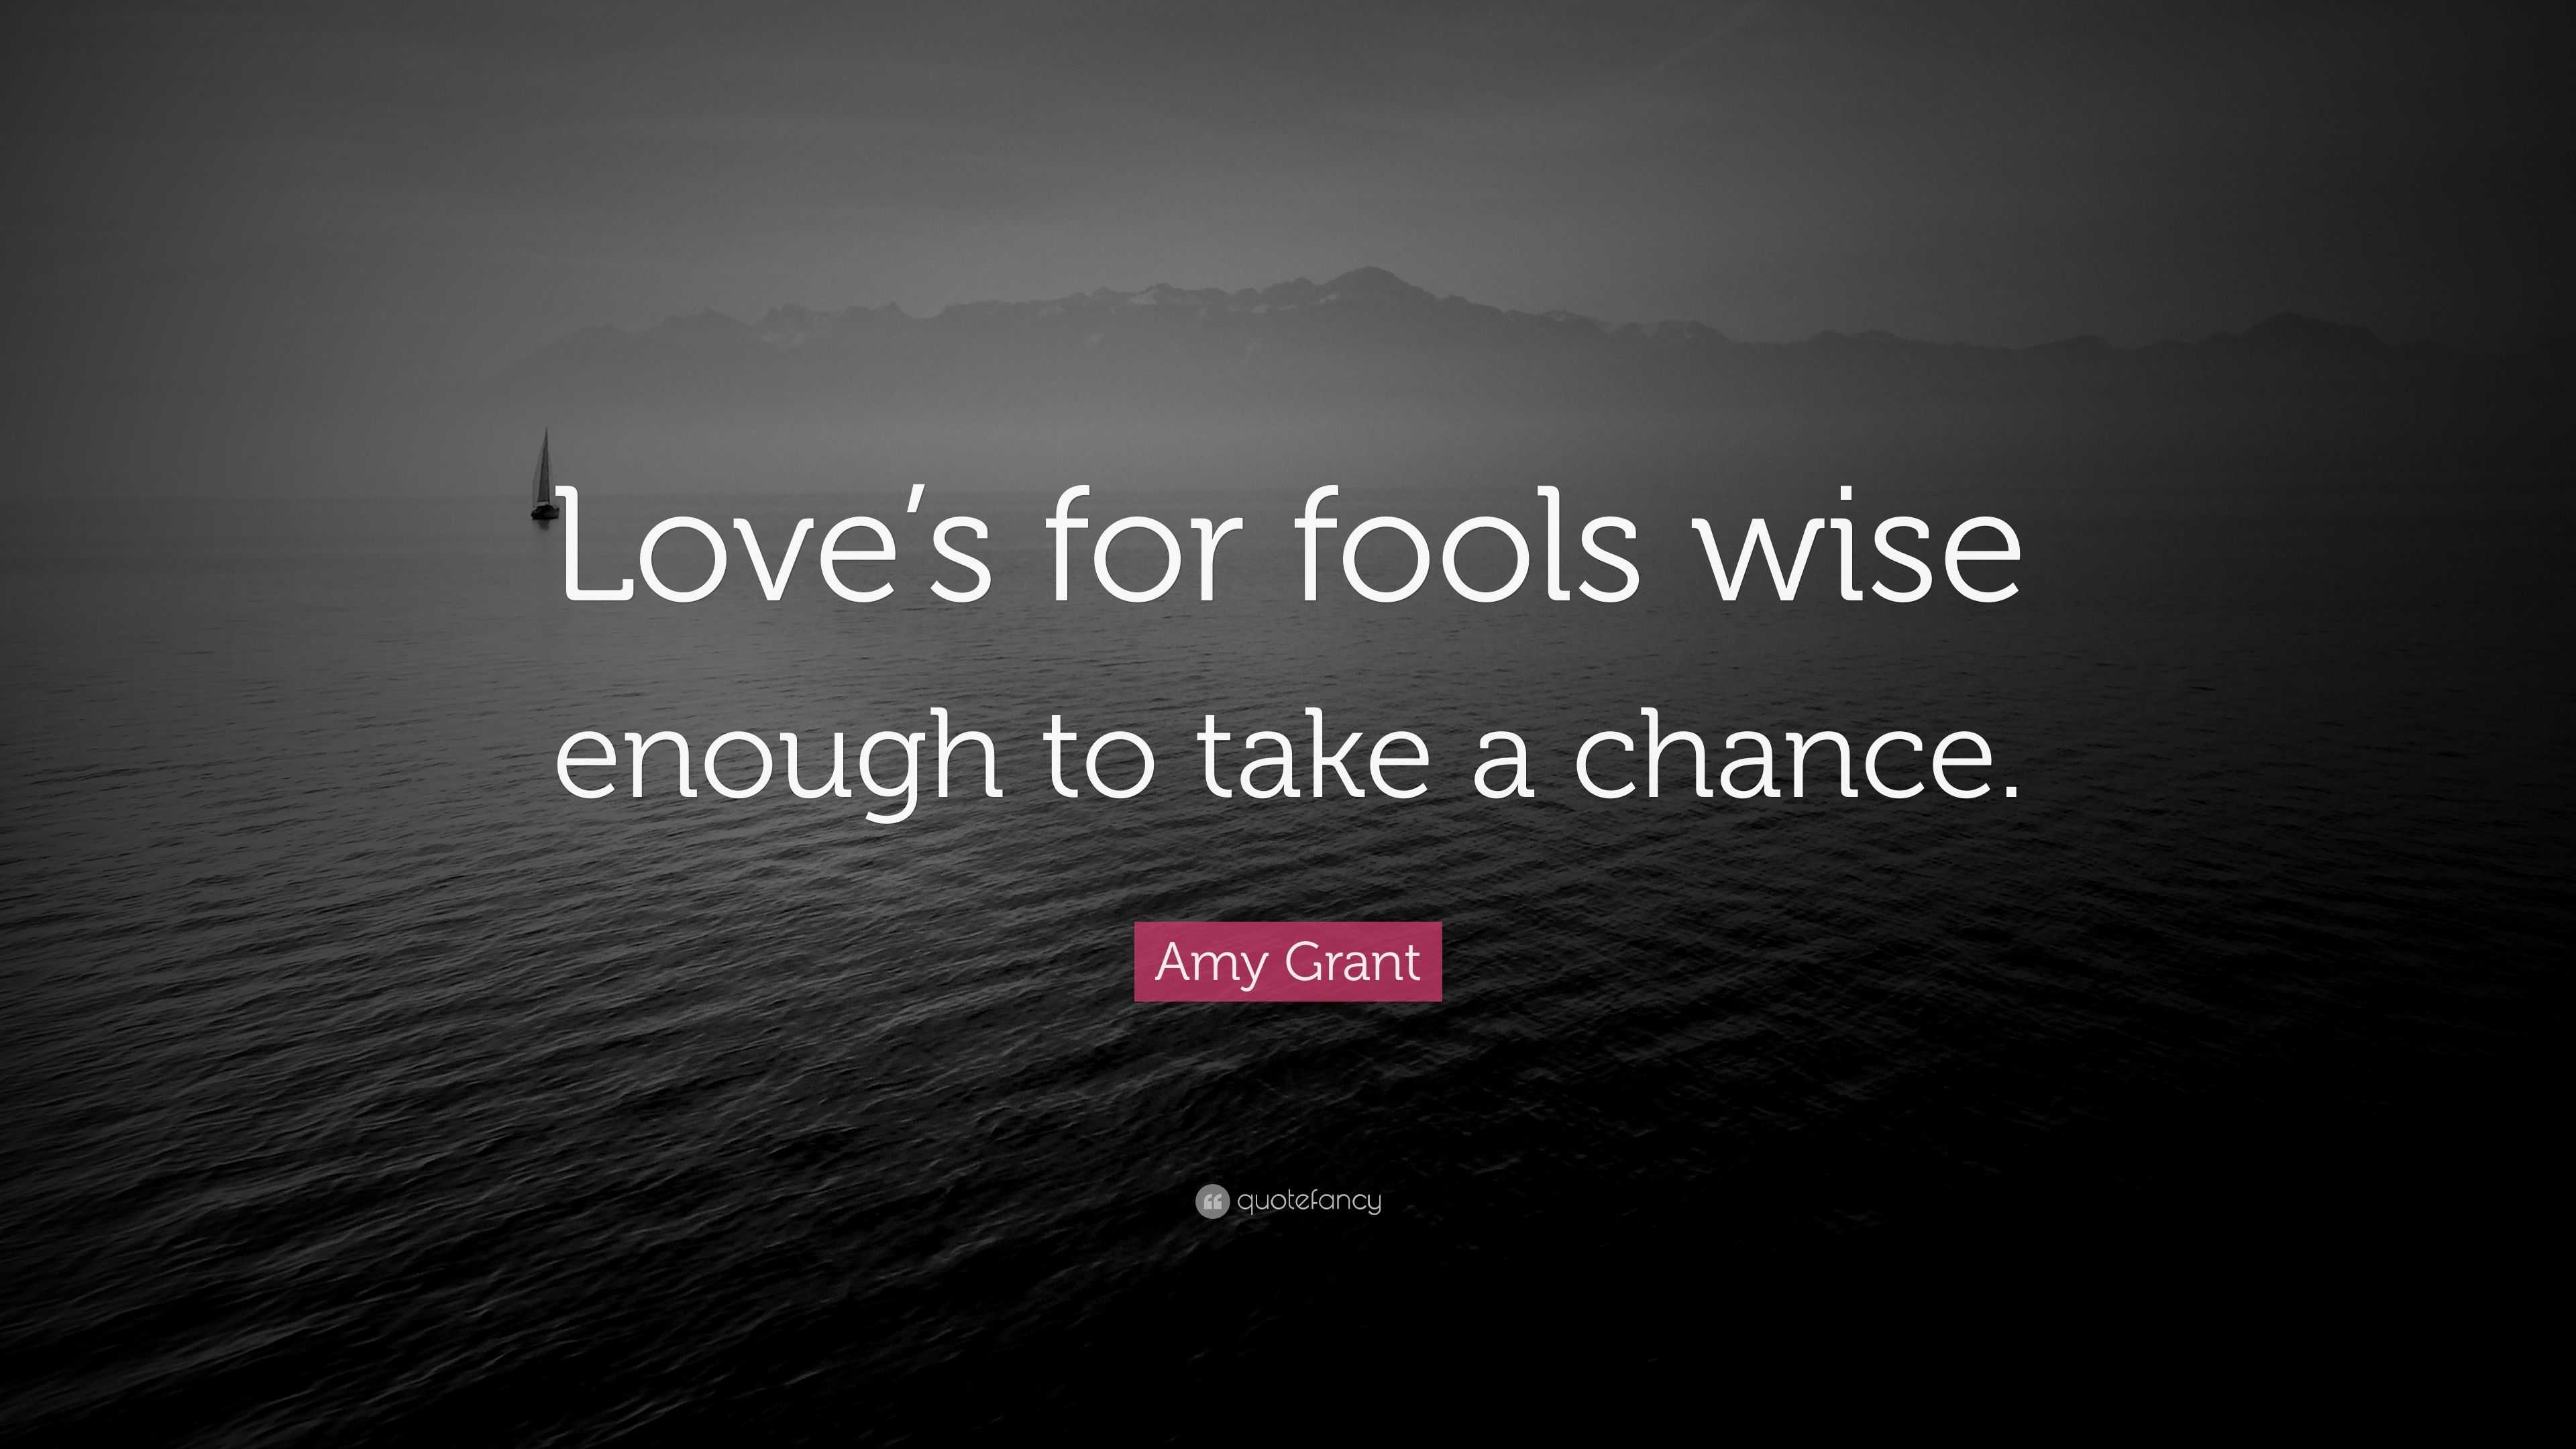 Amy Grant Quote: “Love’s for fools wise enough to take a chance.”